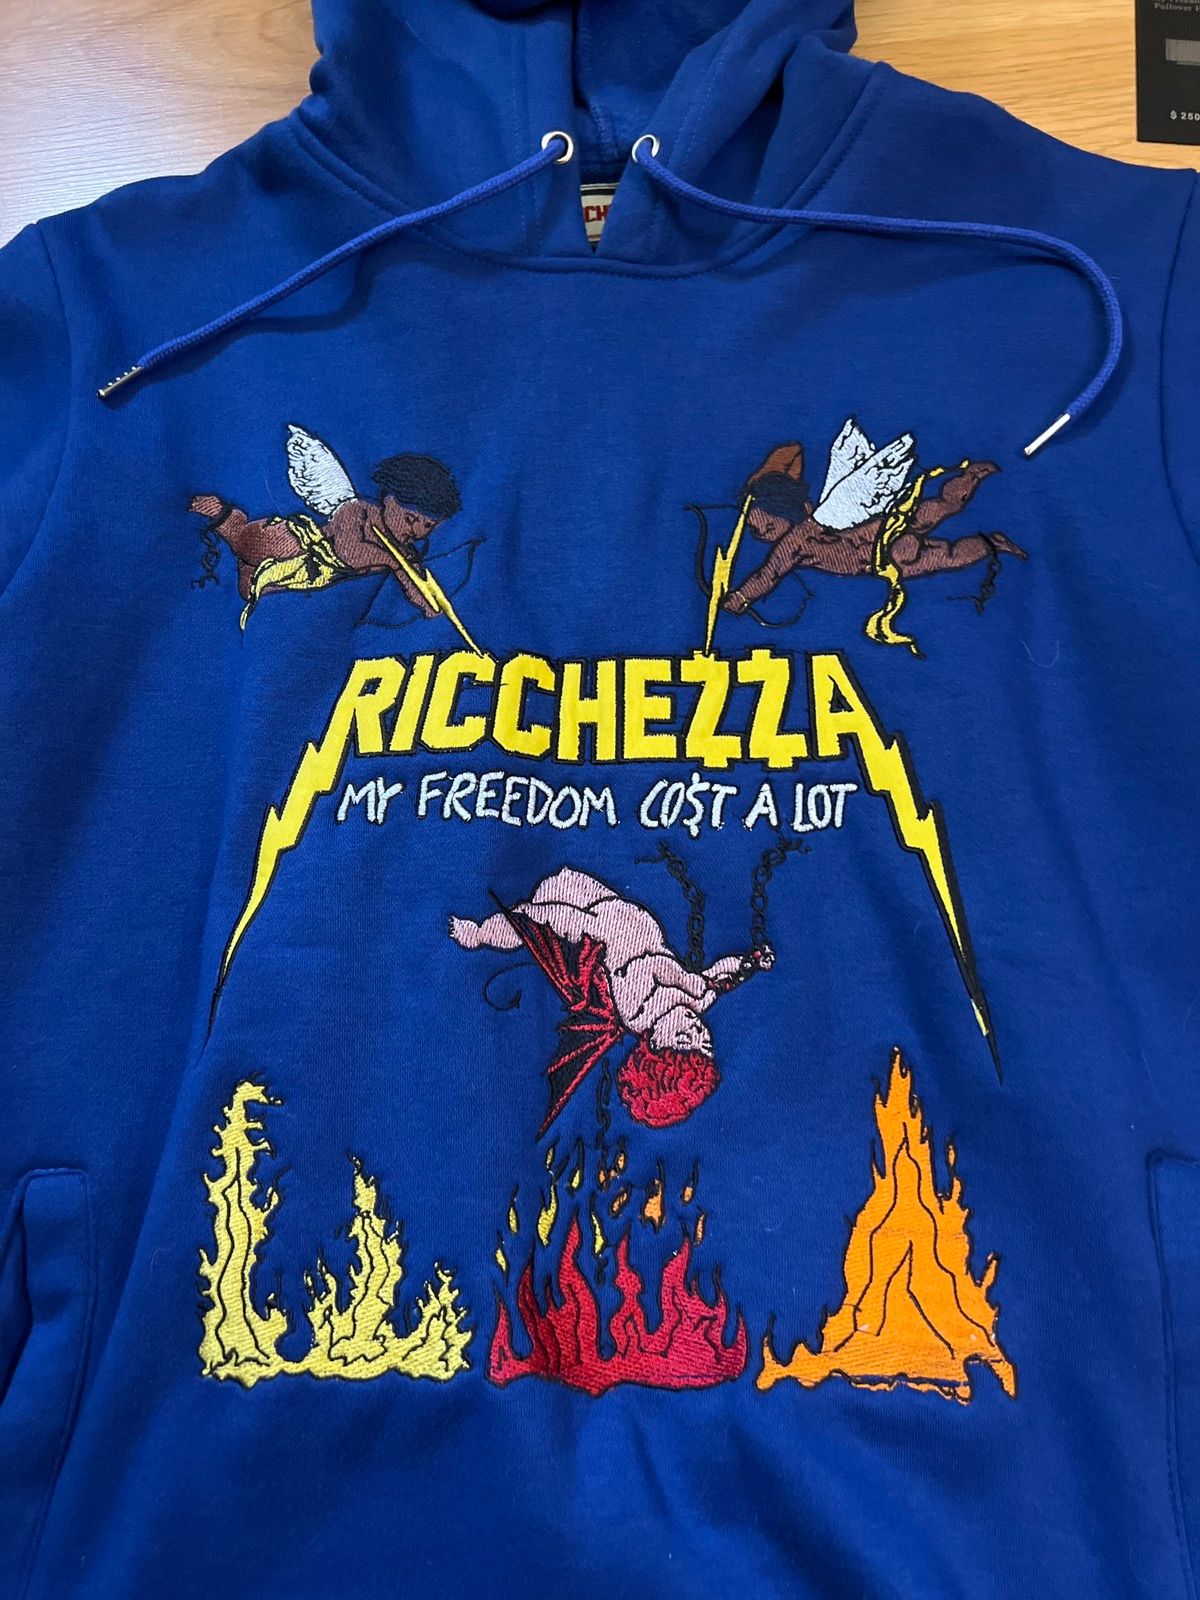 Rare Ricchezza Forever “My Freedom Cost A Lot” hoodie Size US L / EU 52-54 / 3 - 2 Preview